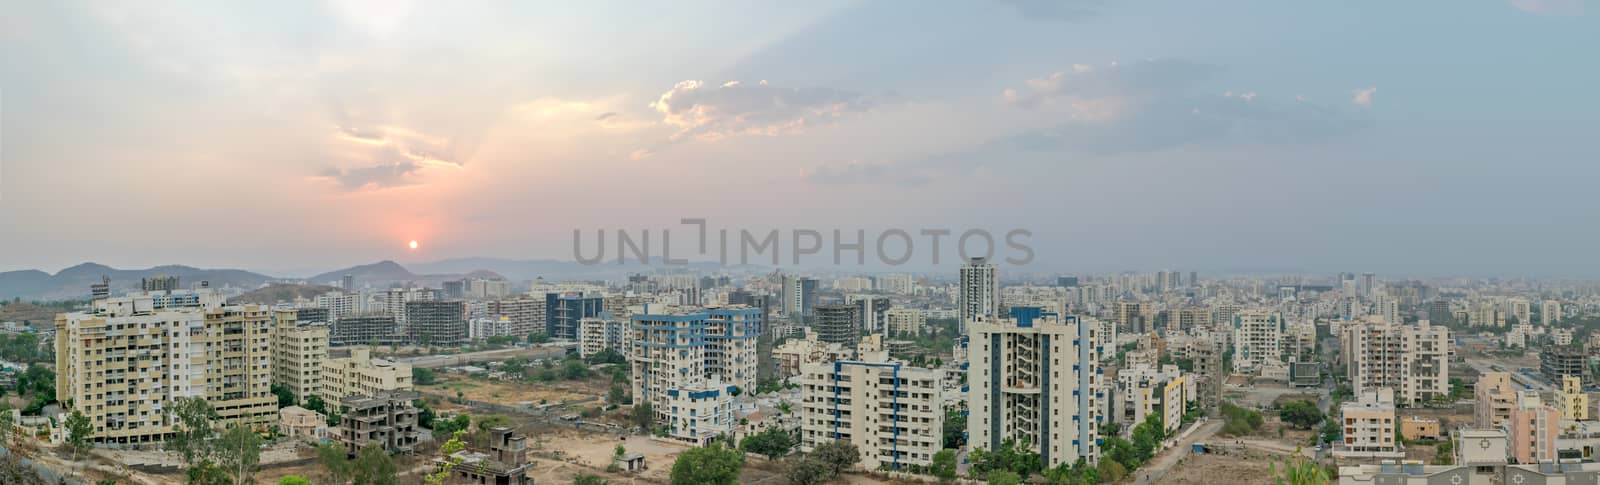 Sunset in a fast growing city with tall buldings. by lalam